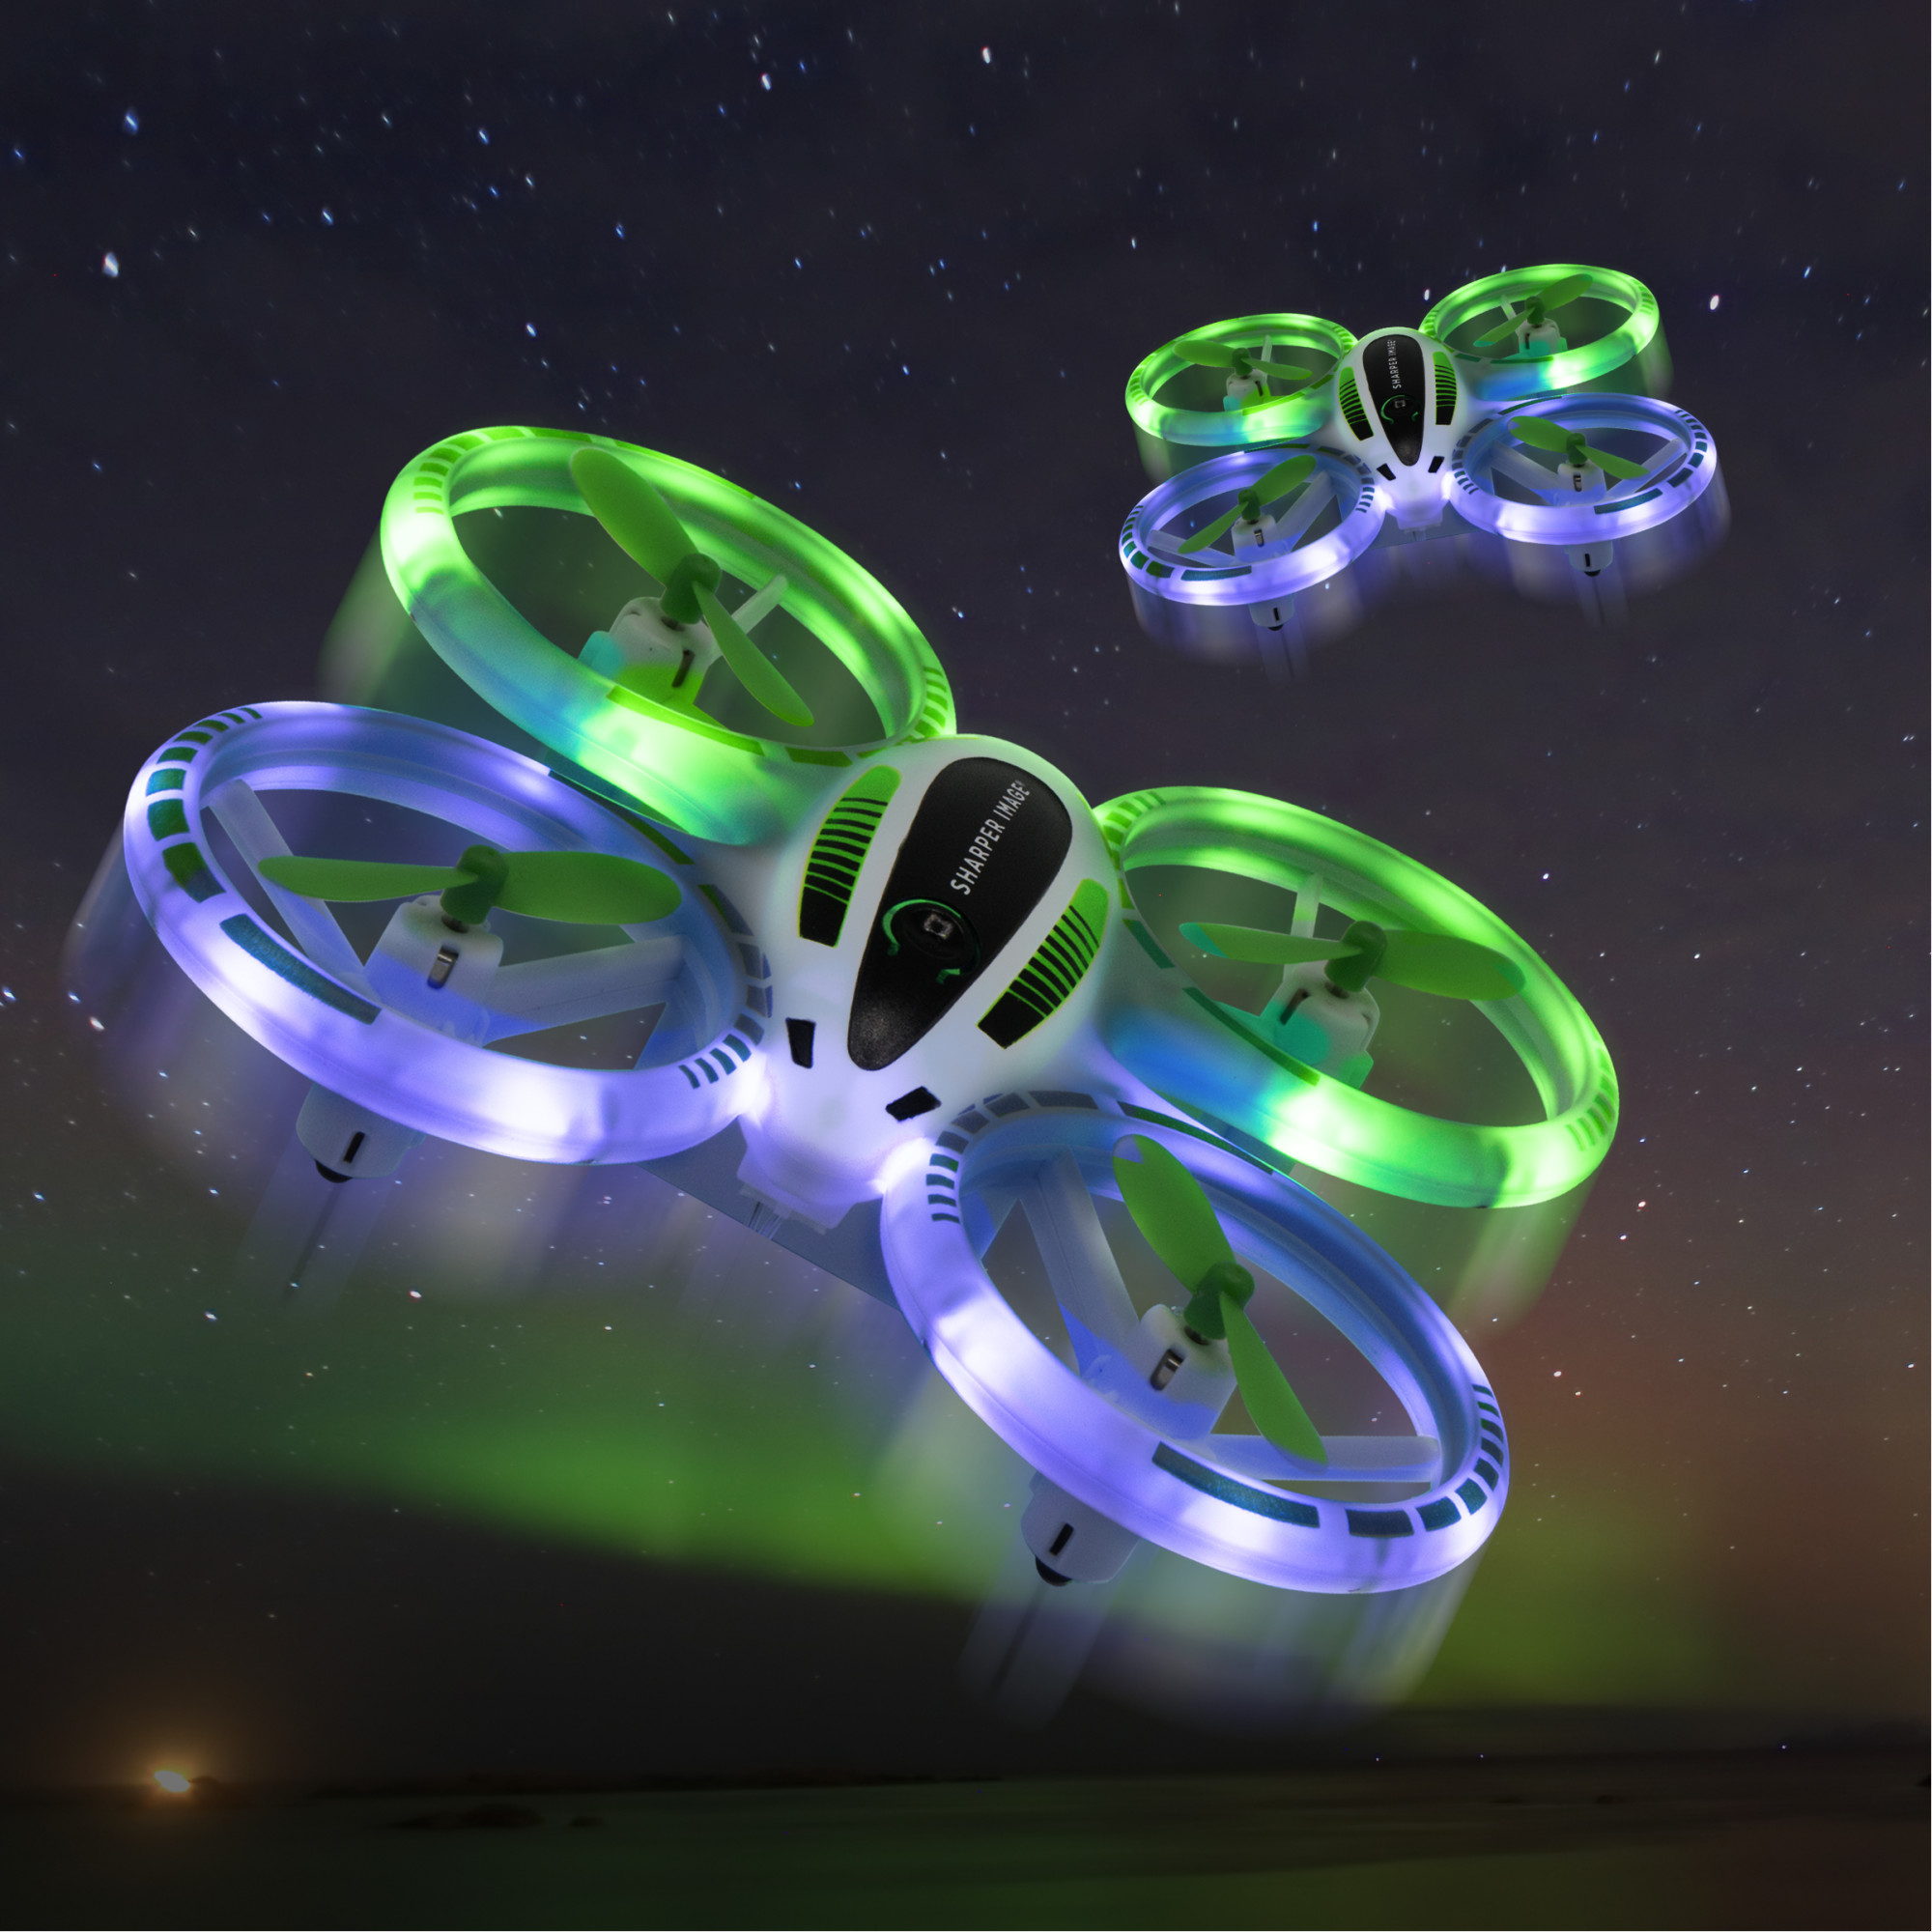 Sharper Image® 2.4GHz RC Glow up Stunt Drone with LED Lights, 8.8 in x 3.5 in - image 3 of 11